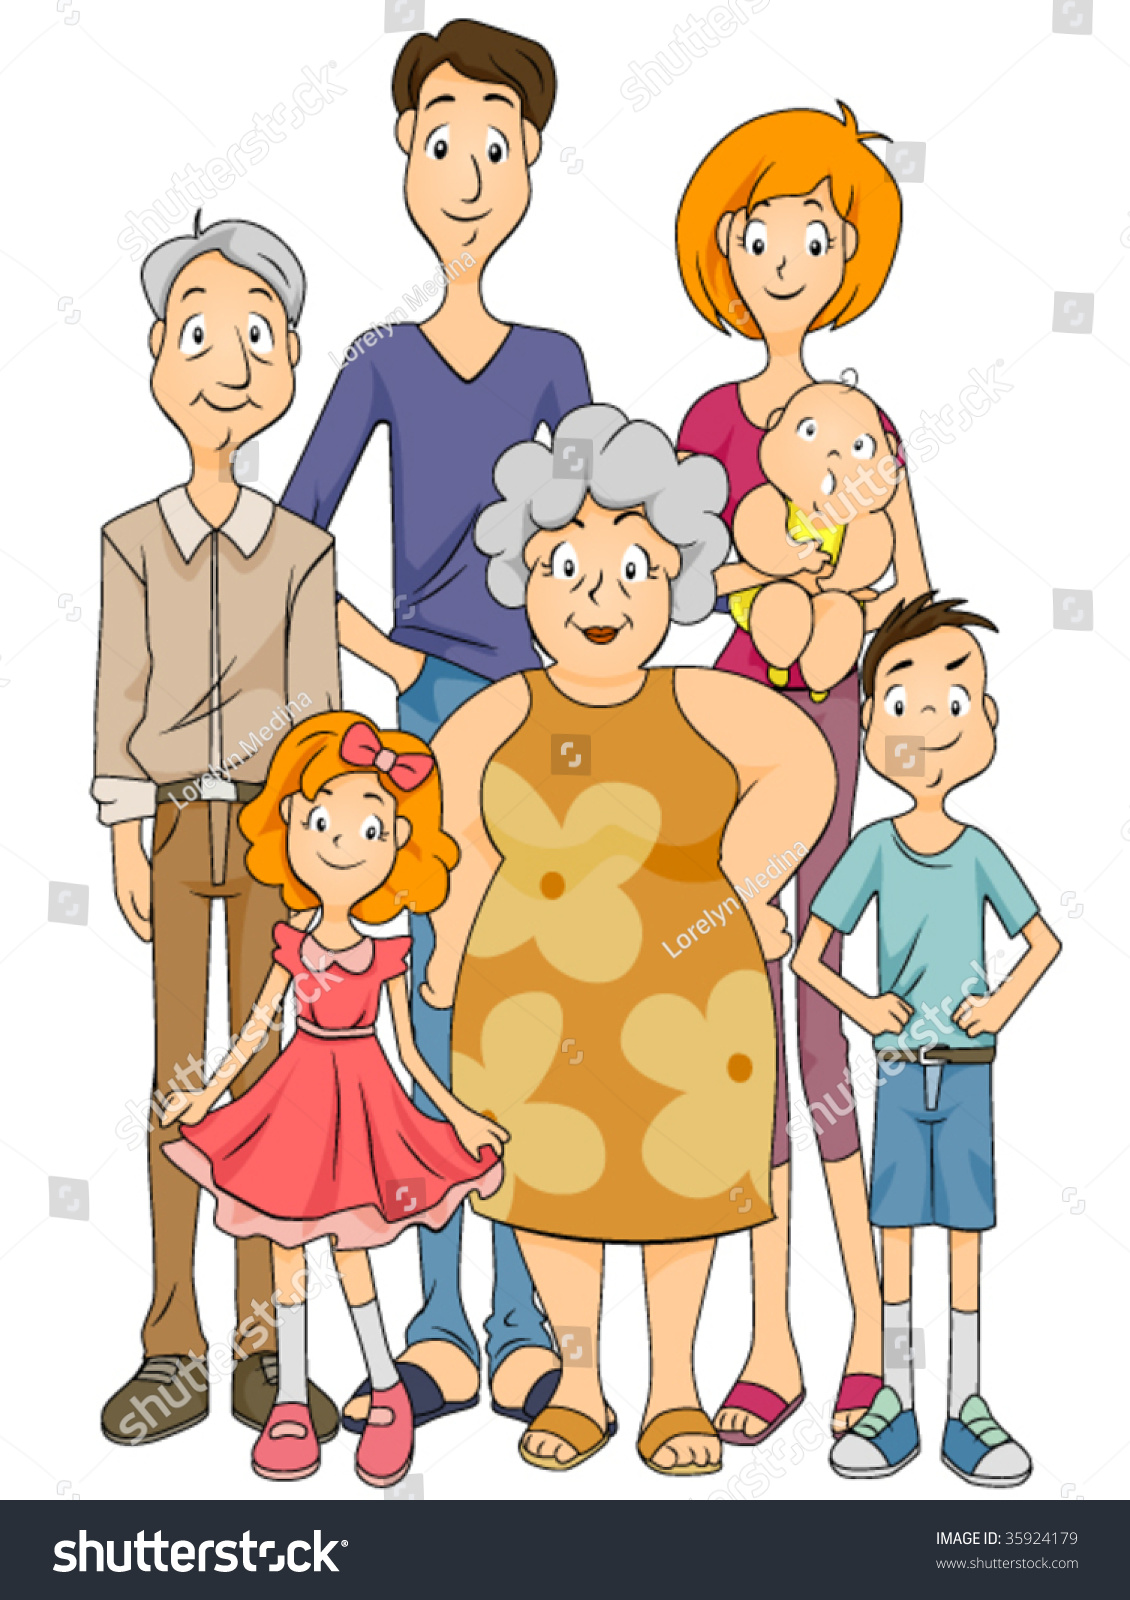 extended family clipart - photo #24